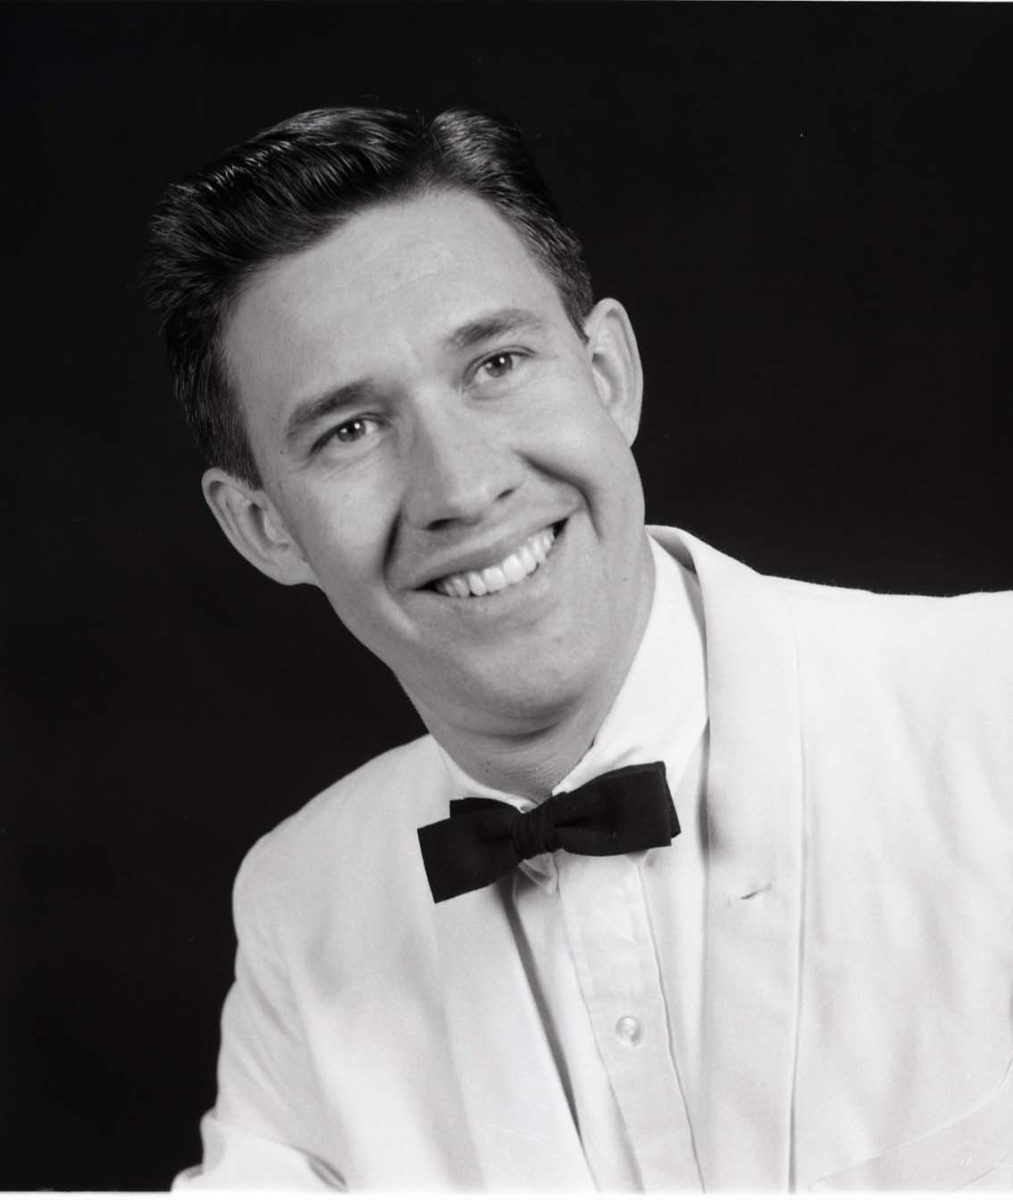 Dean Hurst, portrait taken for the production of The Music Man, Weber State College, 1961-1963.